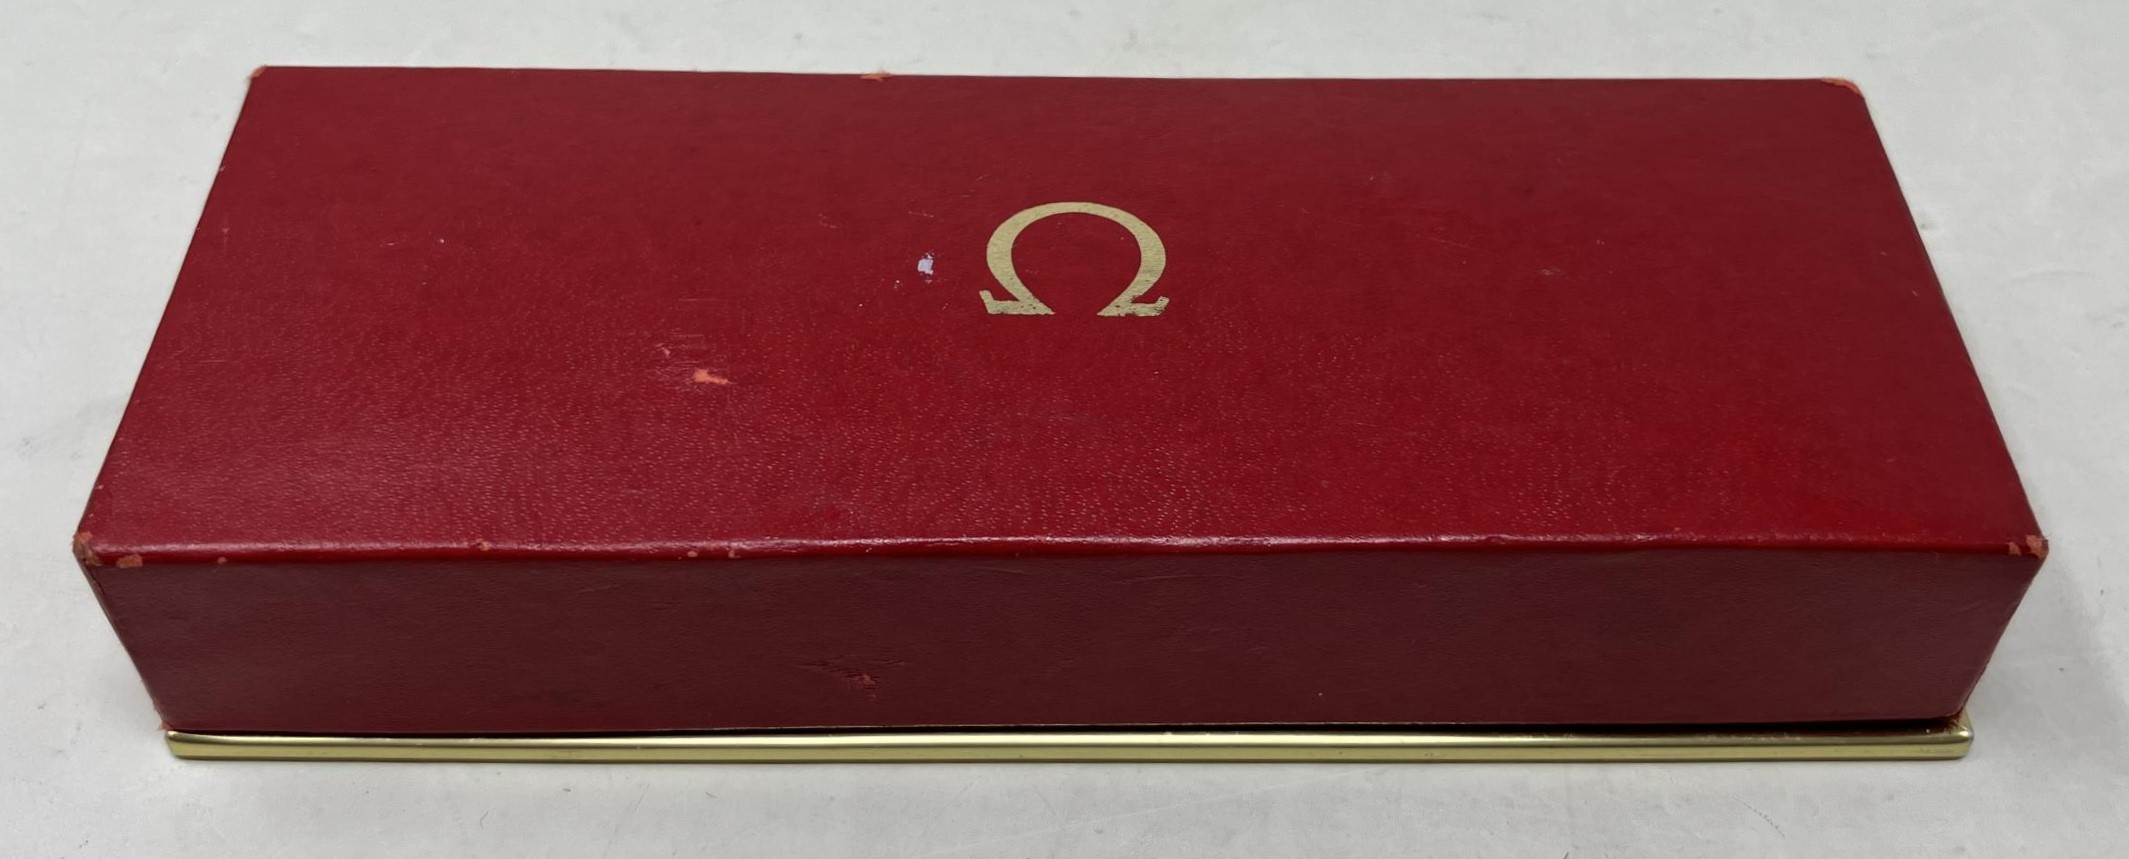 A gentleman's 14ct gold Omega wristwatch, lacking strap, in an associated Omega box - Image 3 of 3